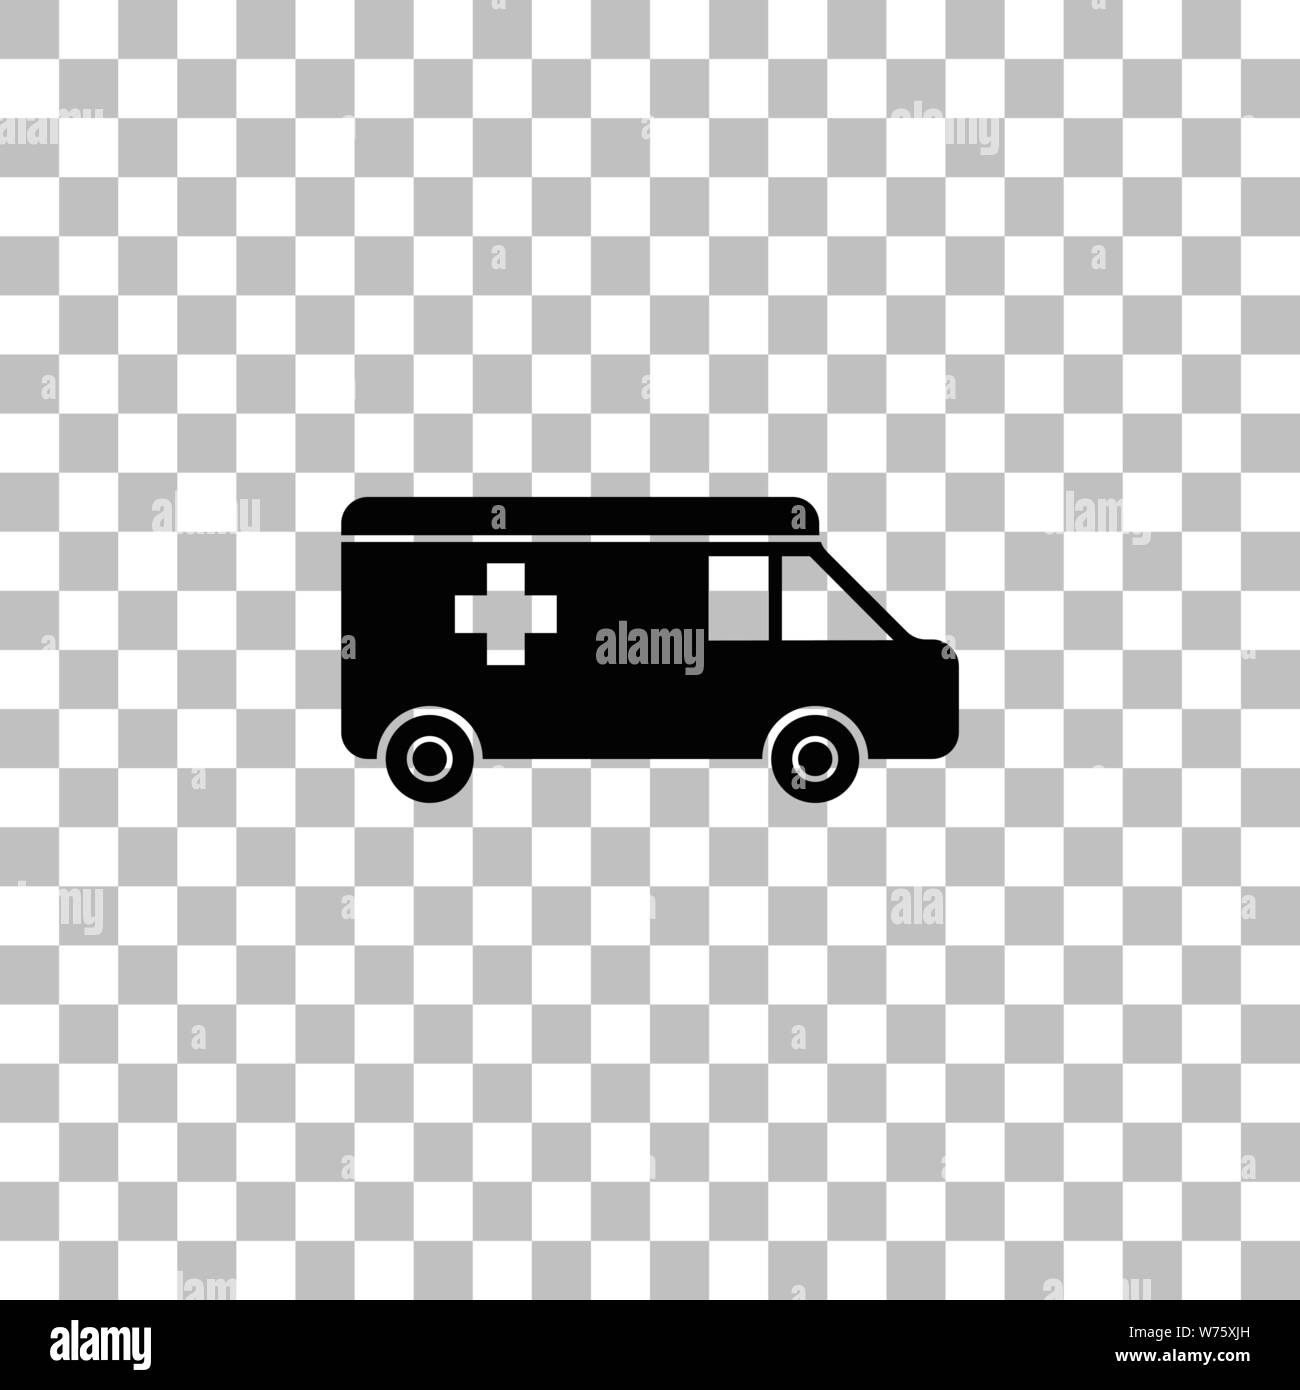 Ambulance. Black flat icon on a transparent background. Pictogram for your project Stock Vector